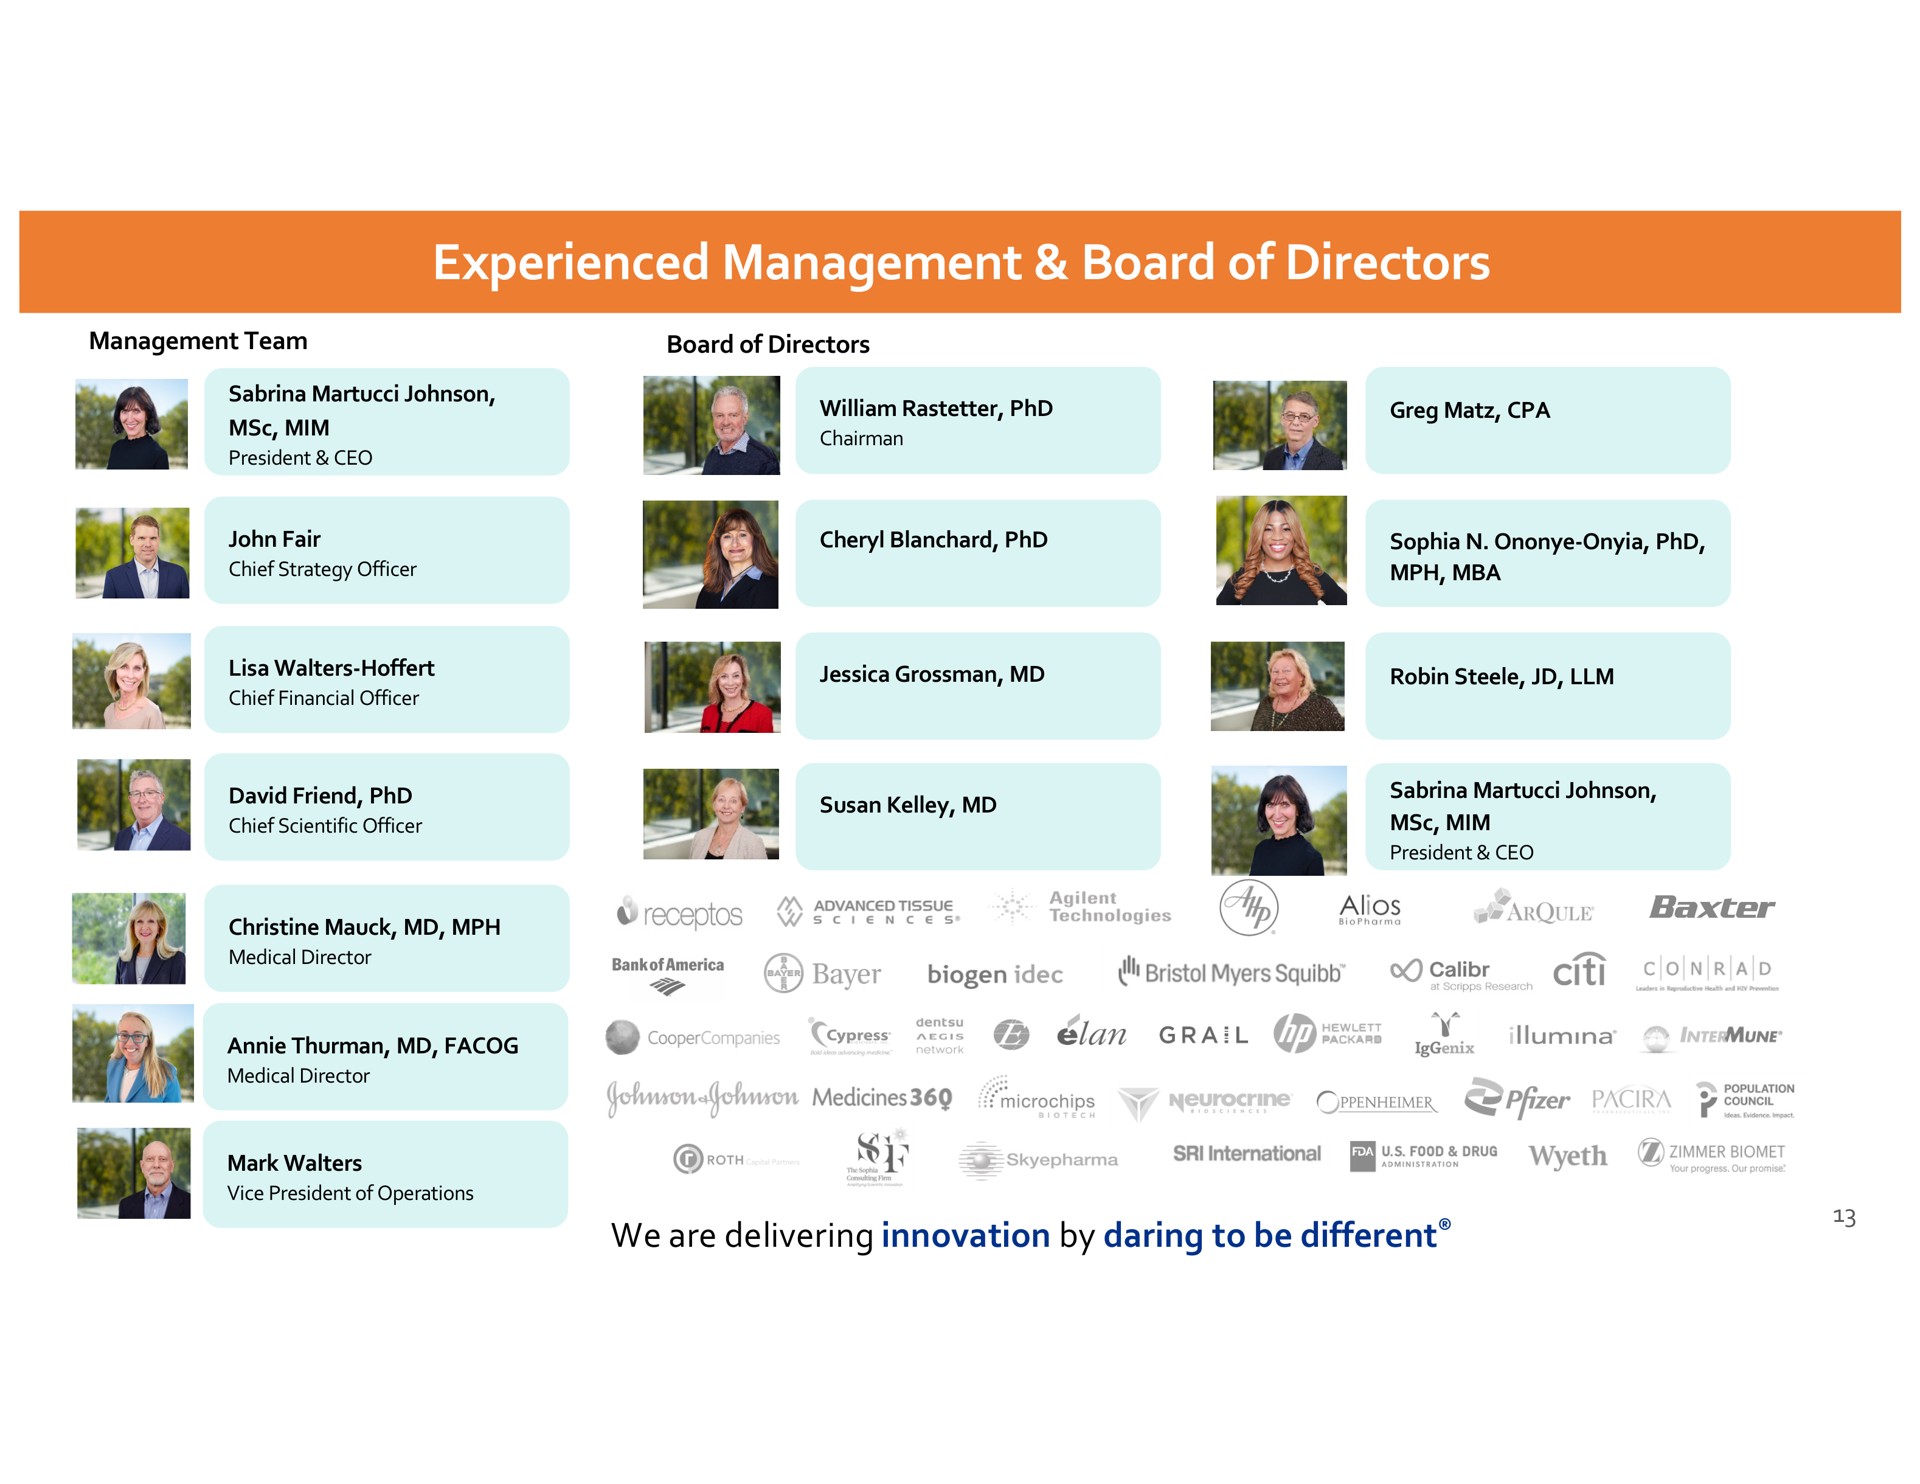 experienced management board of directors we are delivering innovation by daring to be different mid technologies baxter | Dare Bioscience